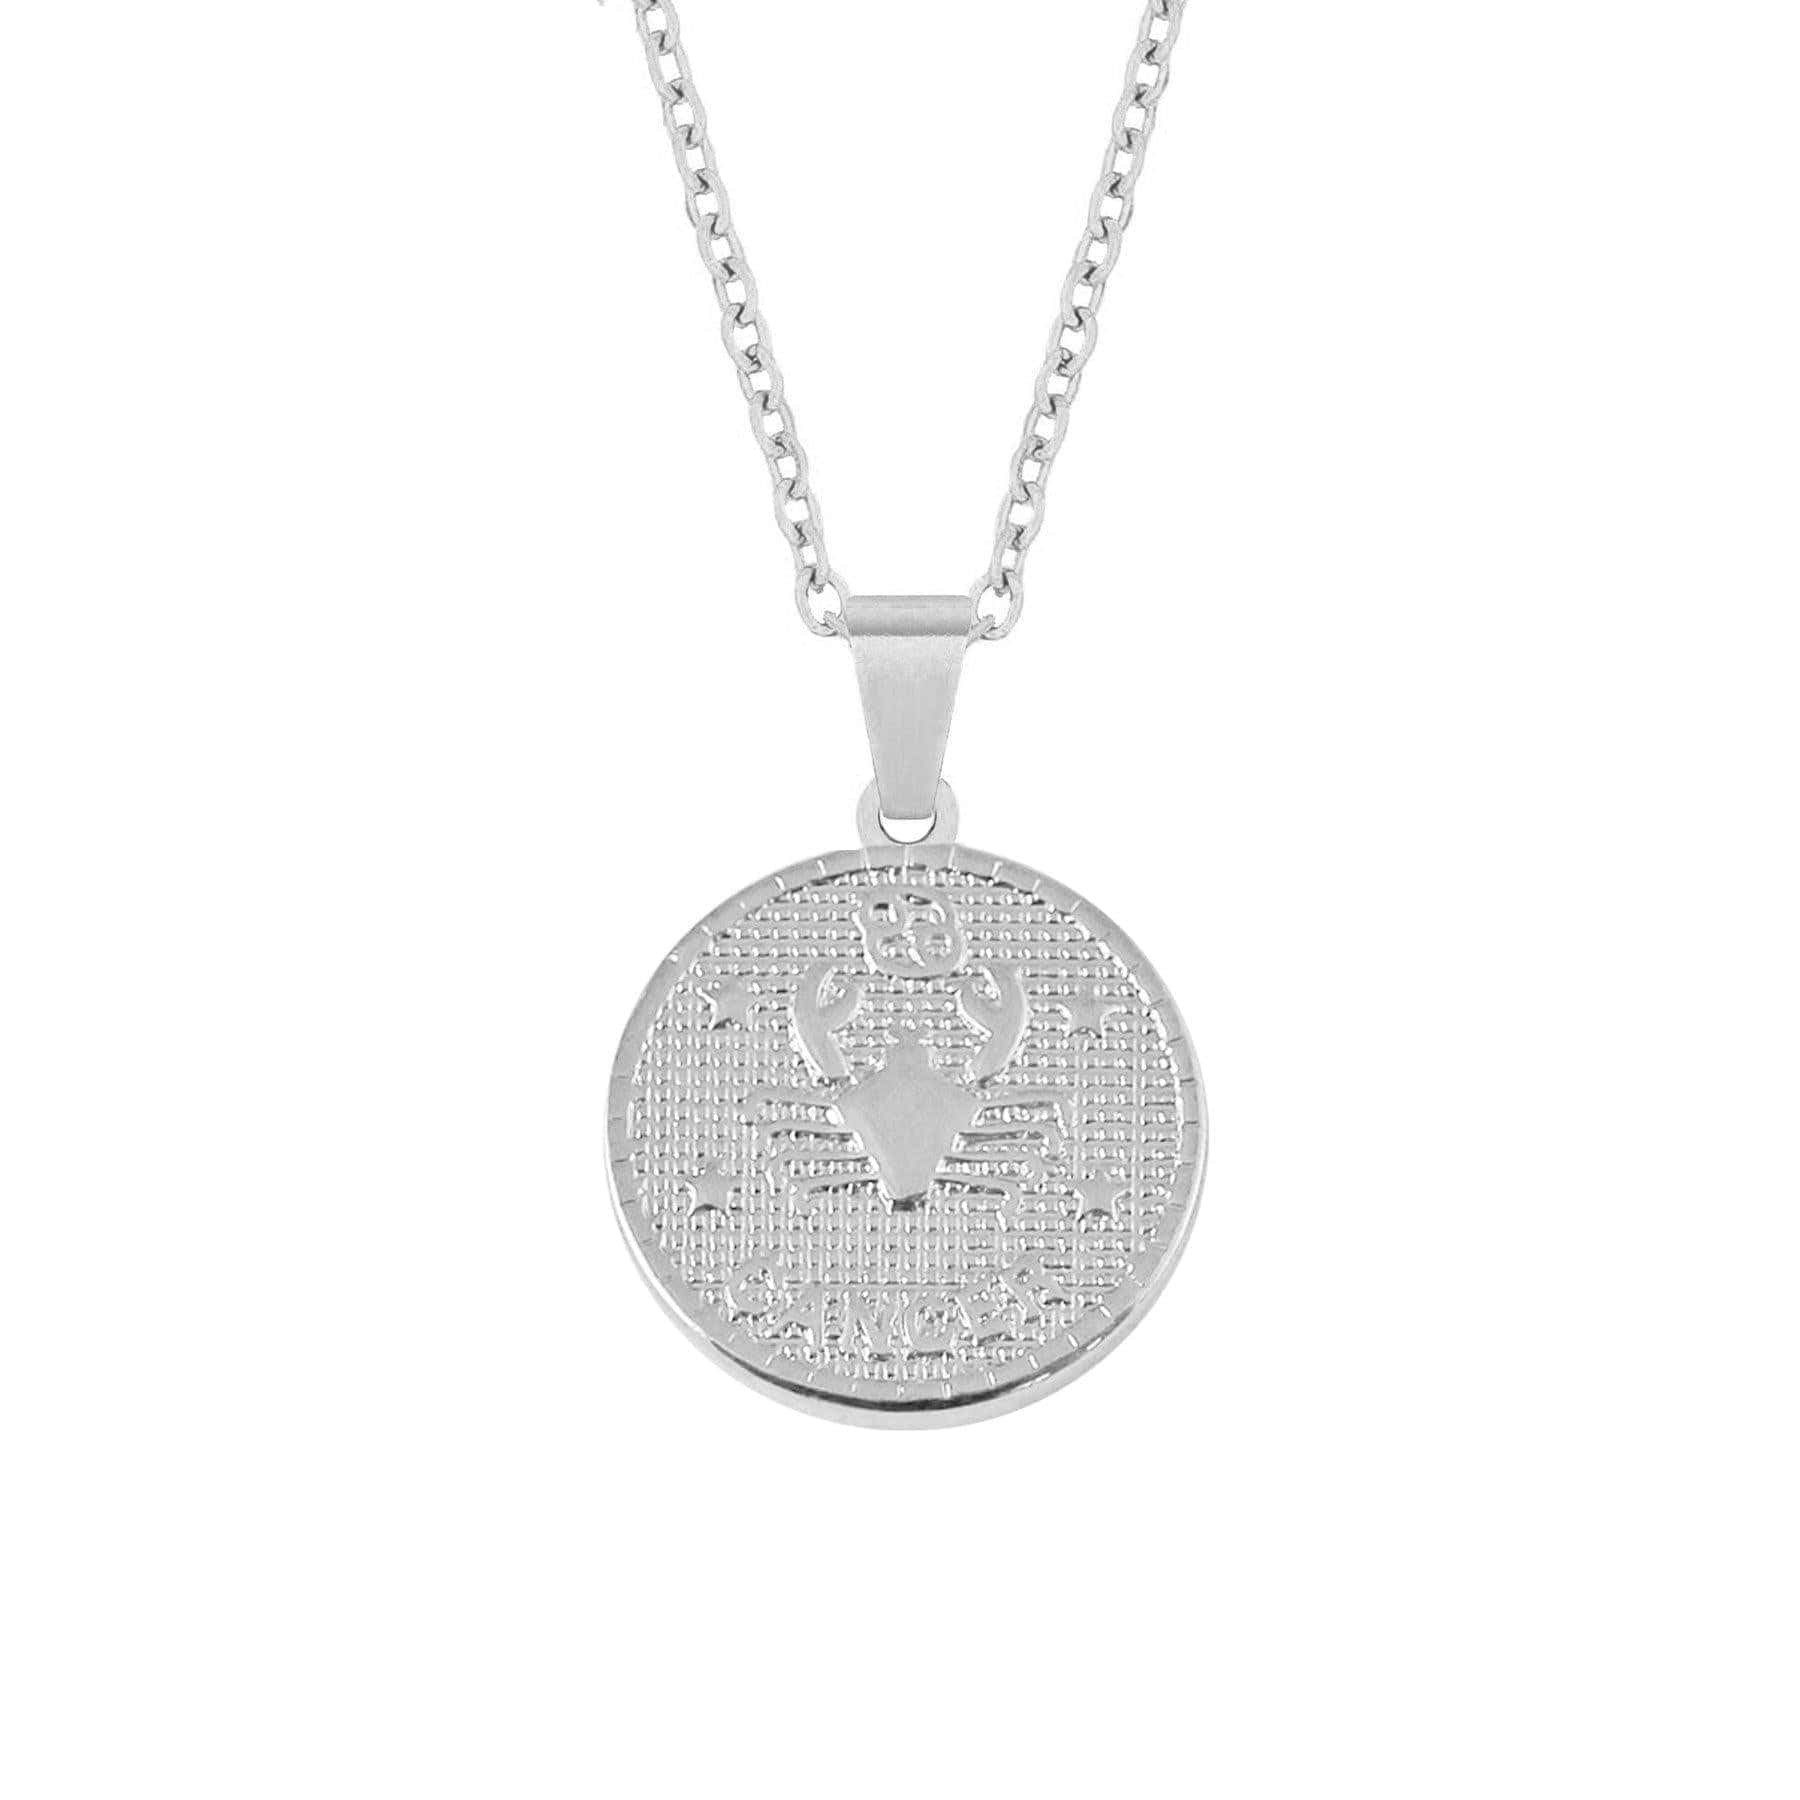 BohoMoon Stainless Steel Coin Zodiac Necklace Silver / Capricorn